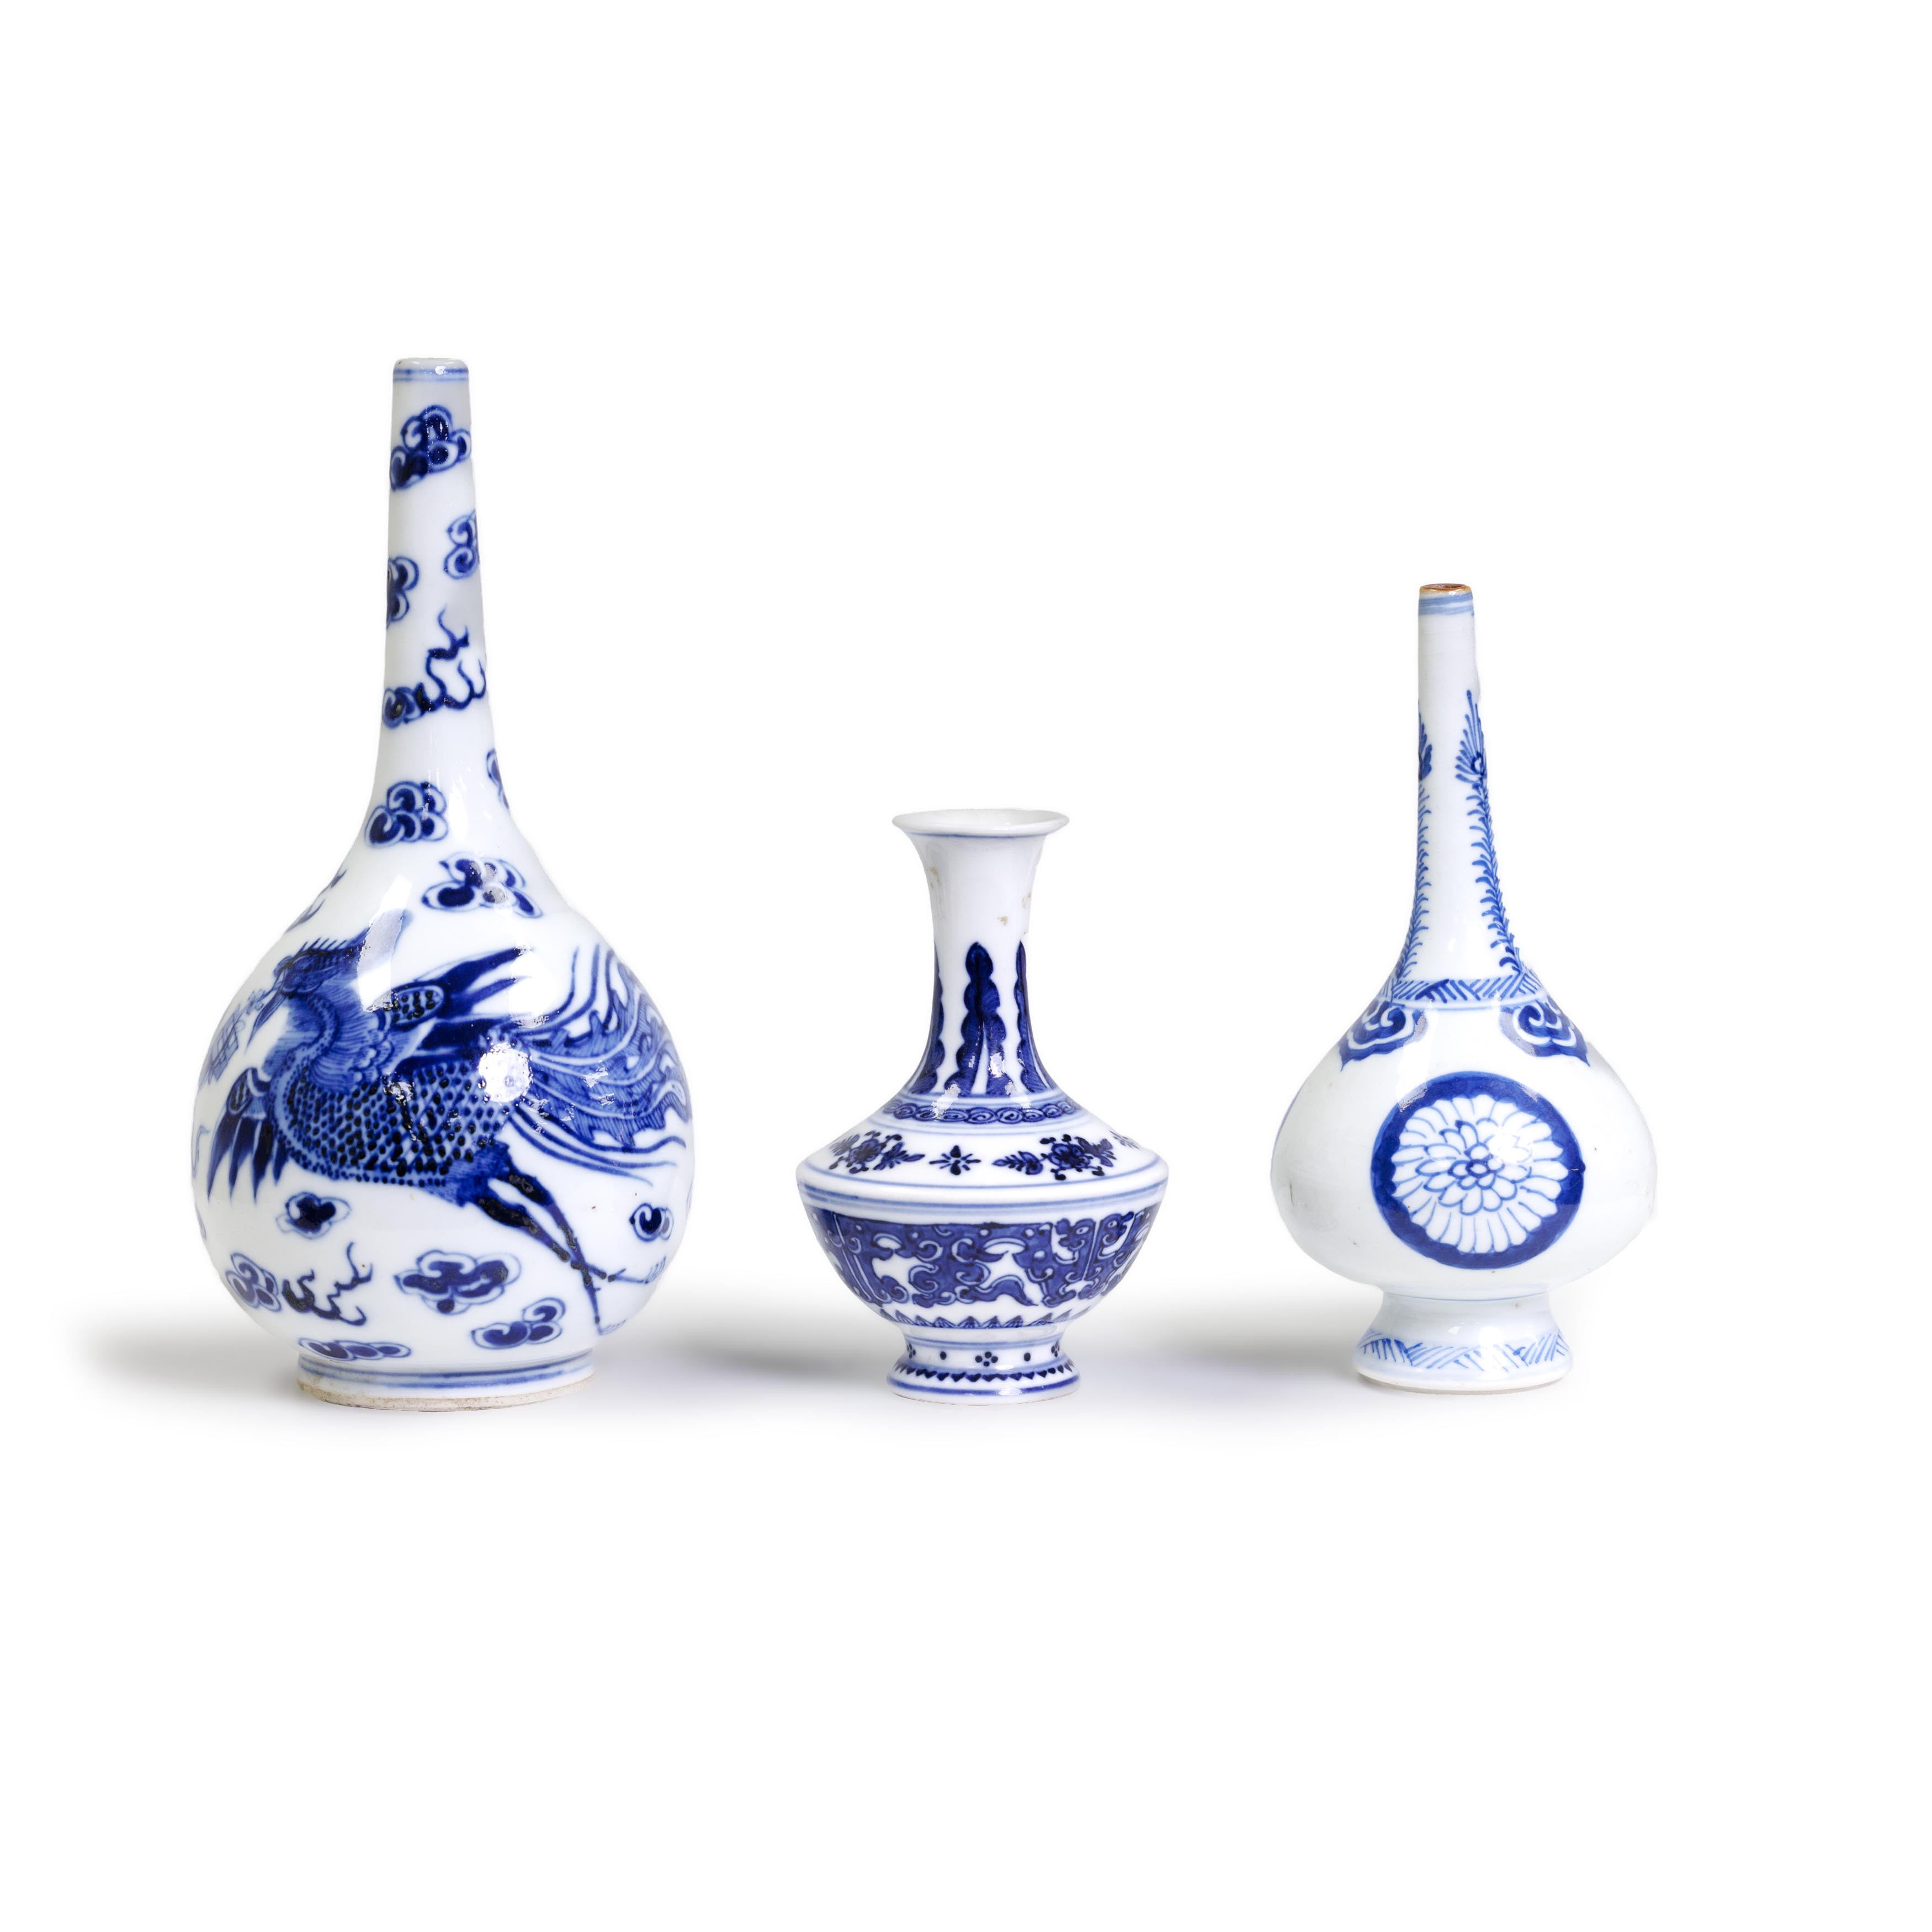 A group of three Chinese blue and white vases Qing dynasty, 18th century - 20th century Compris...